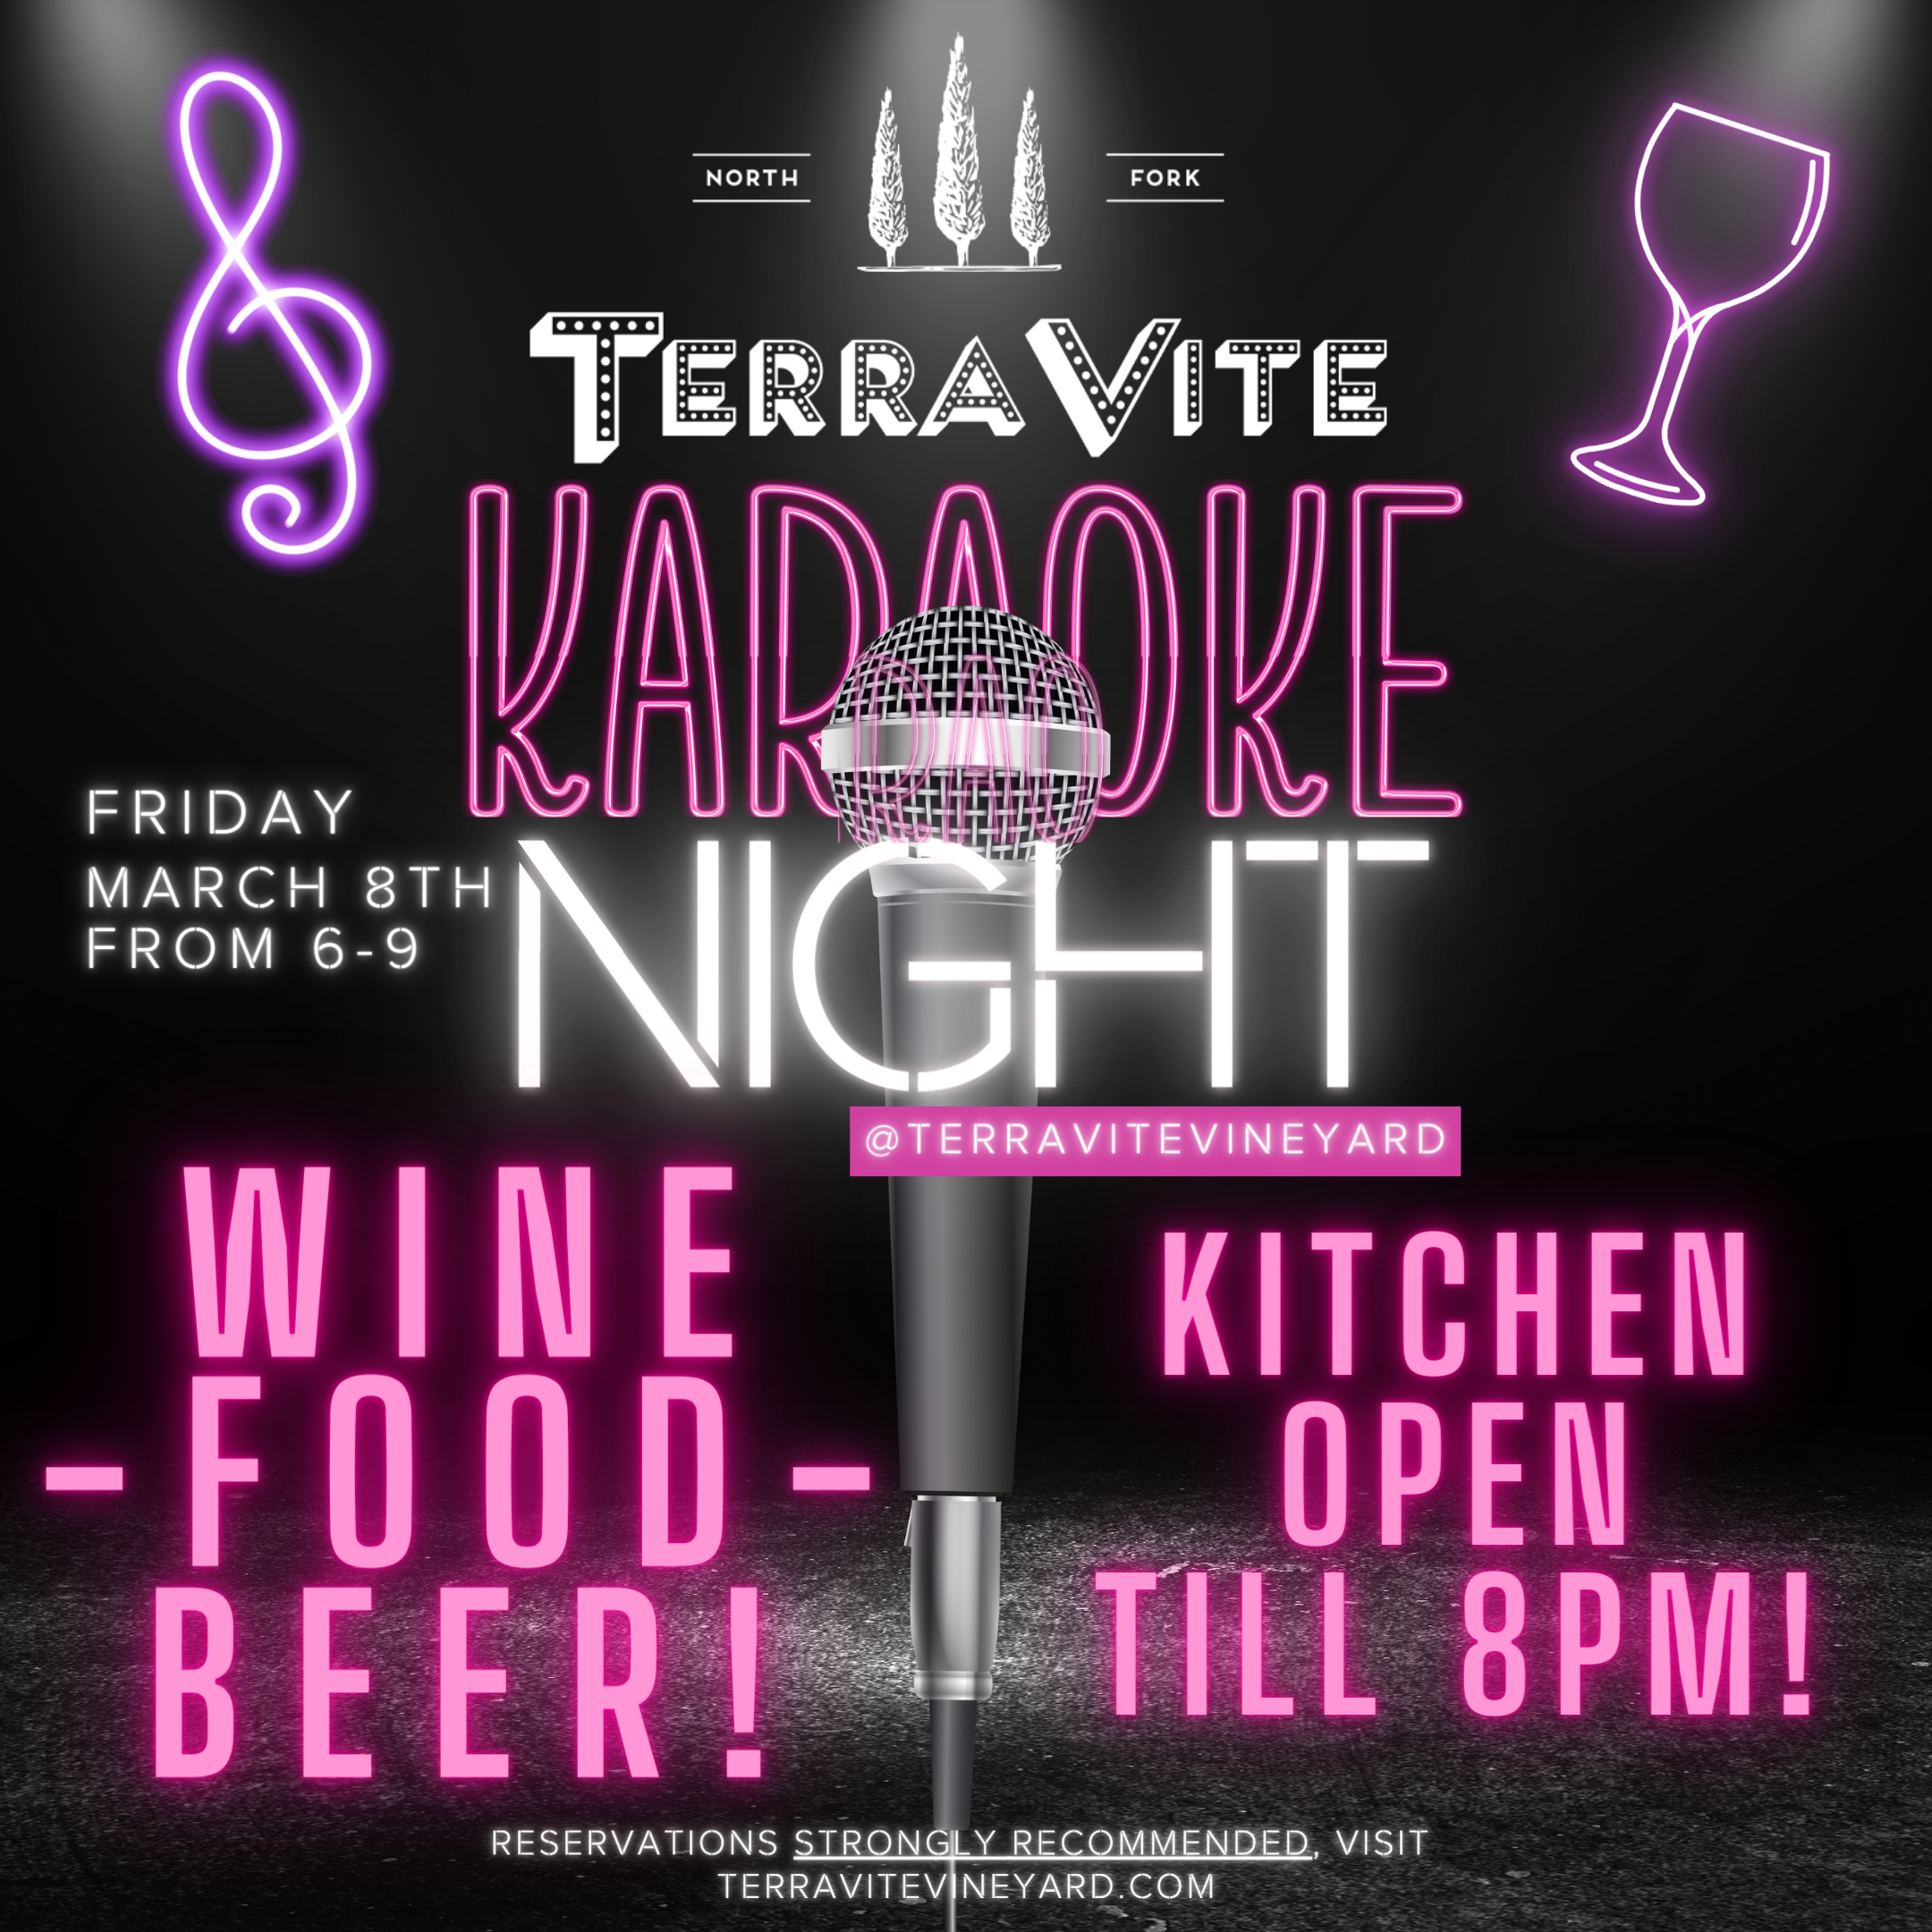 Join us on March 8th from 6-9pm for KARAOKE NIGHT!